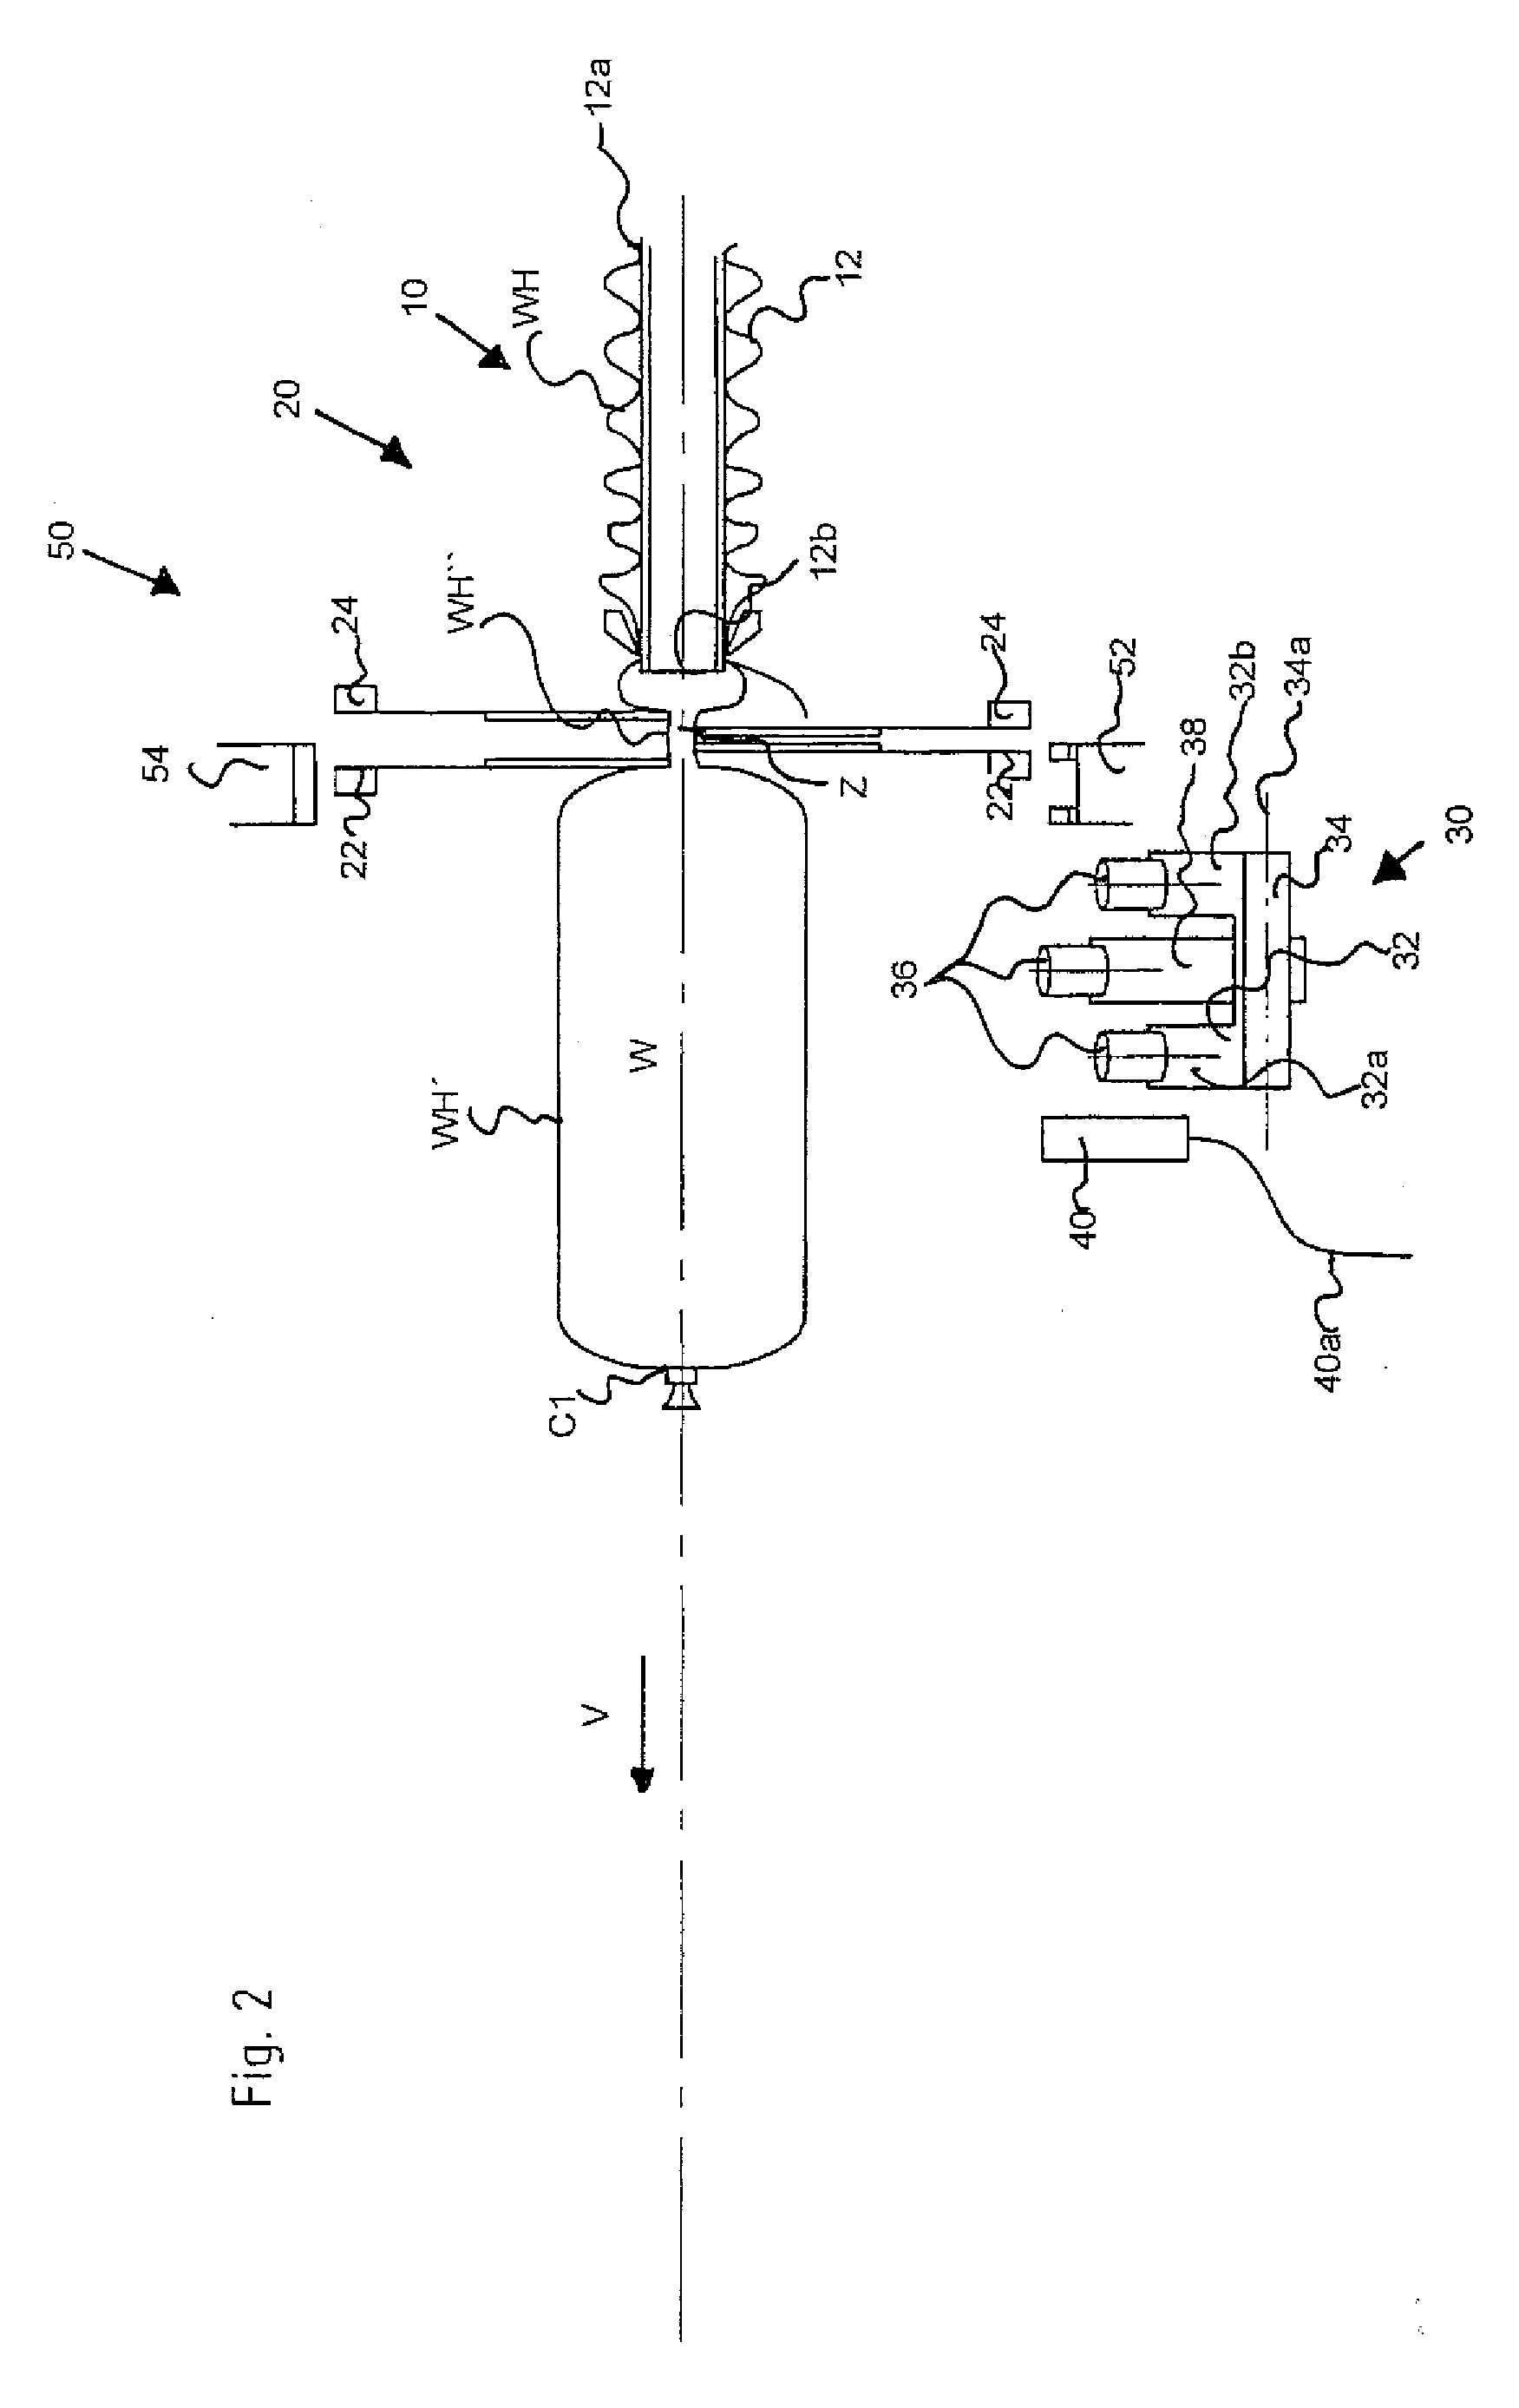 Device for providing a second tail length